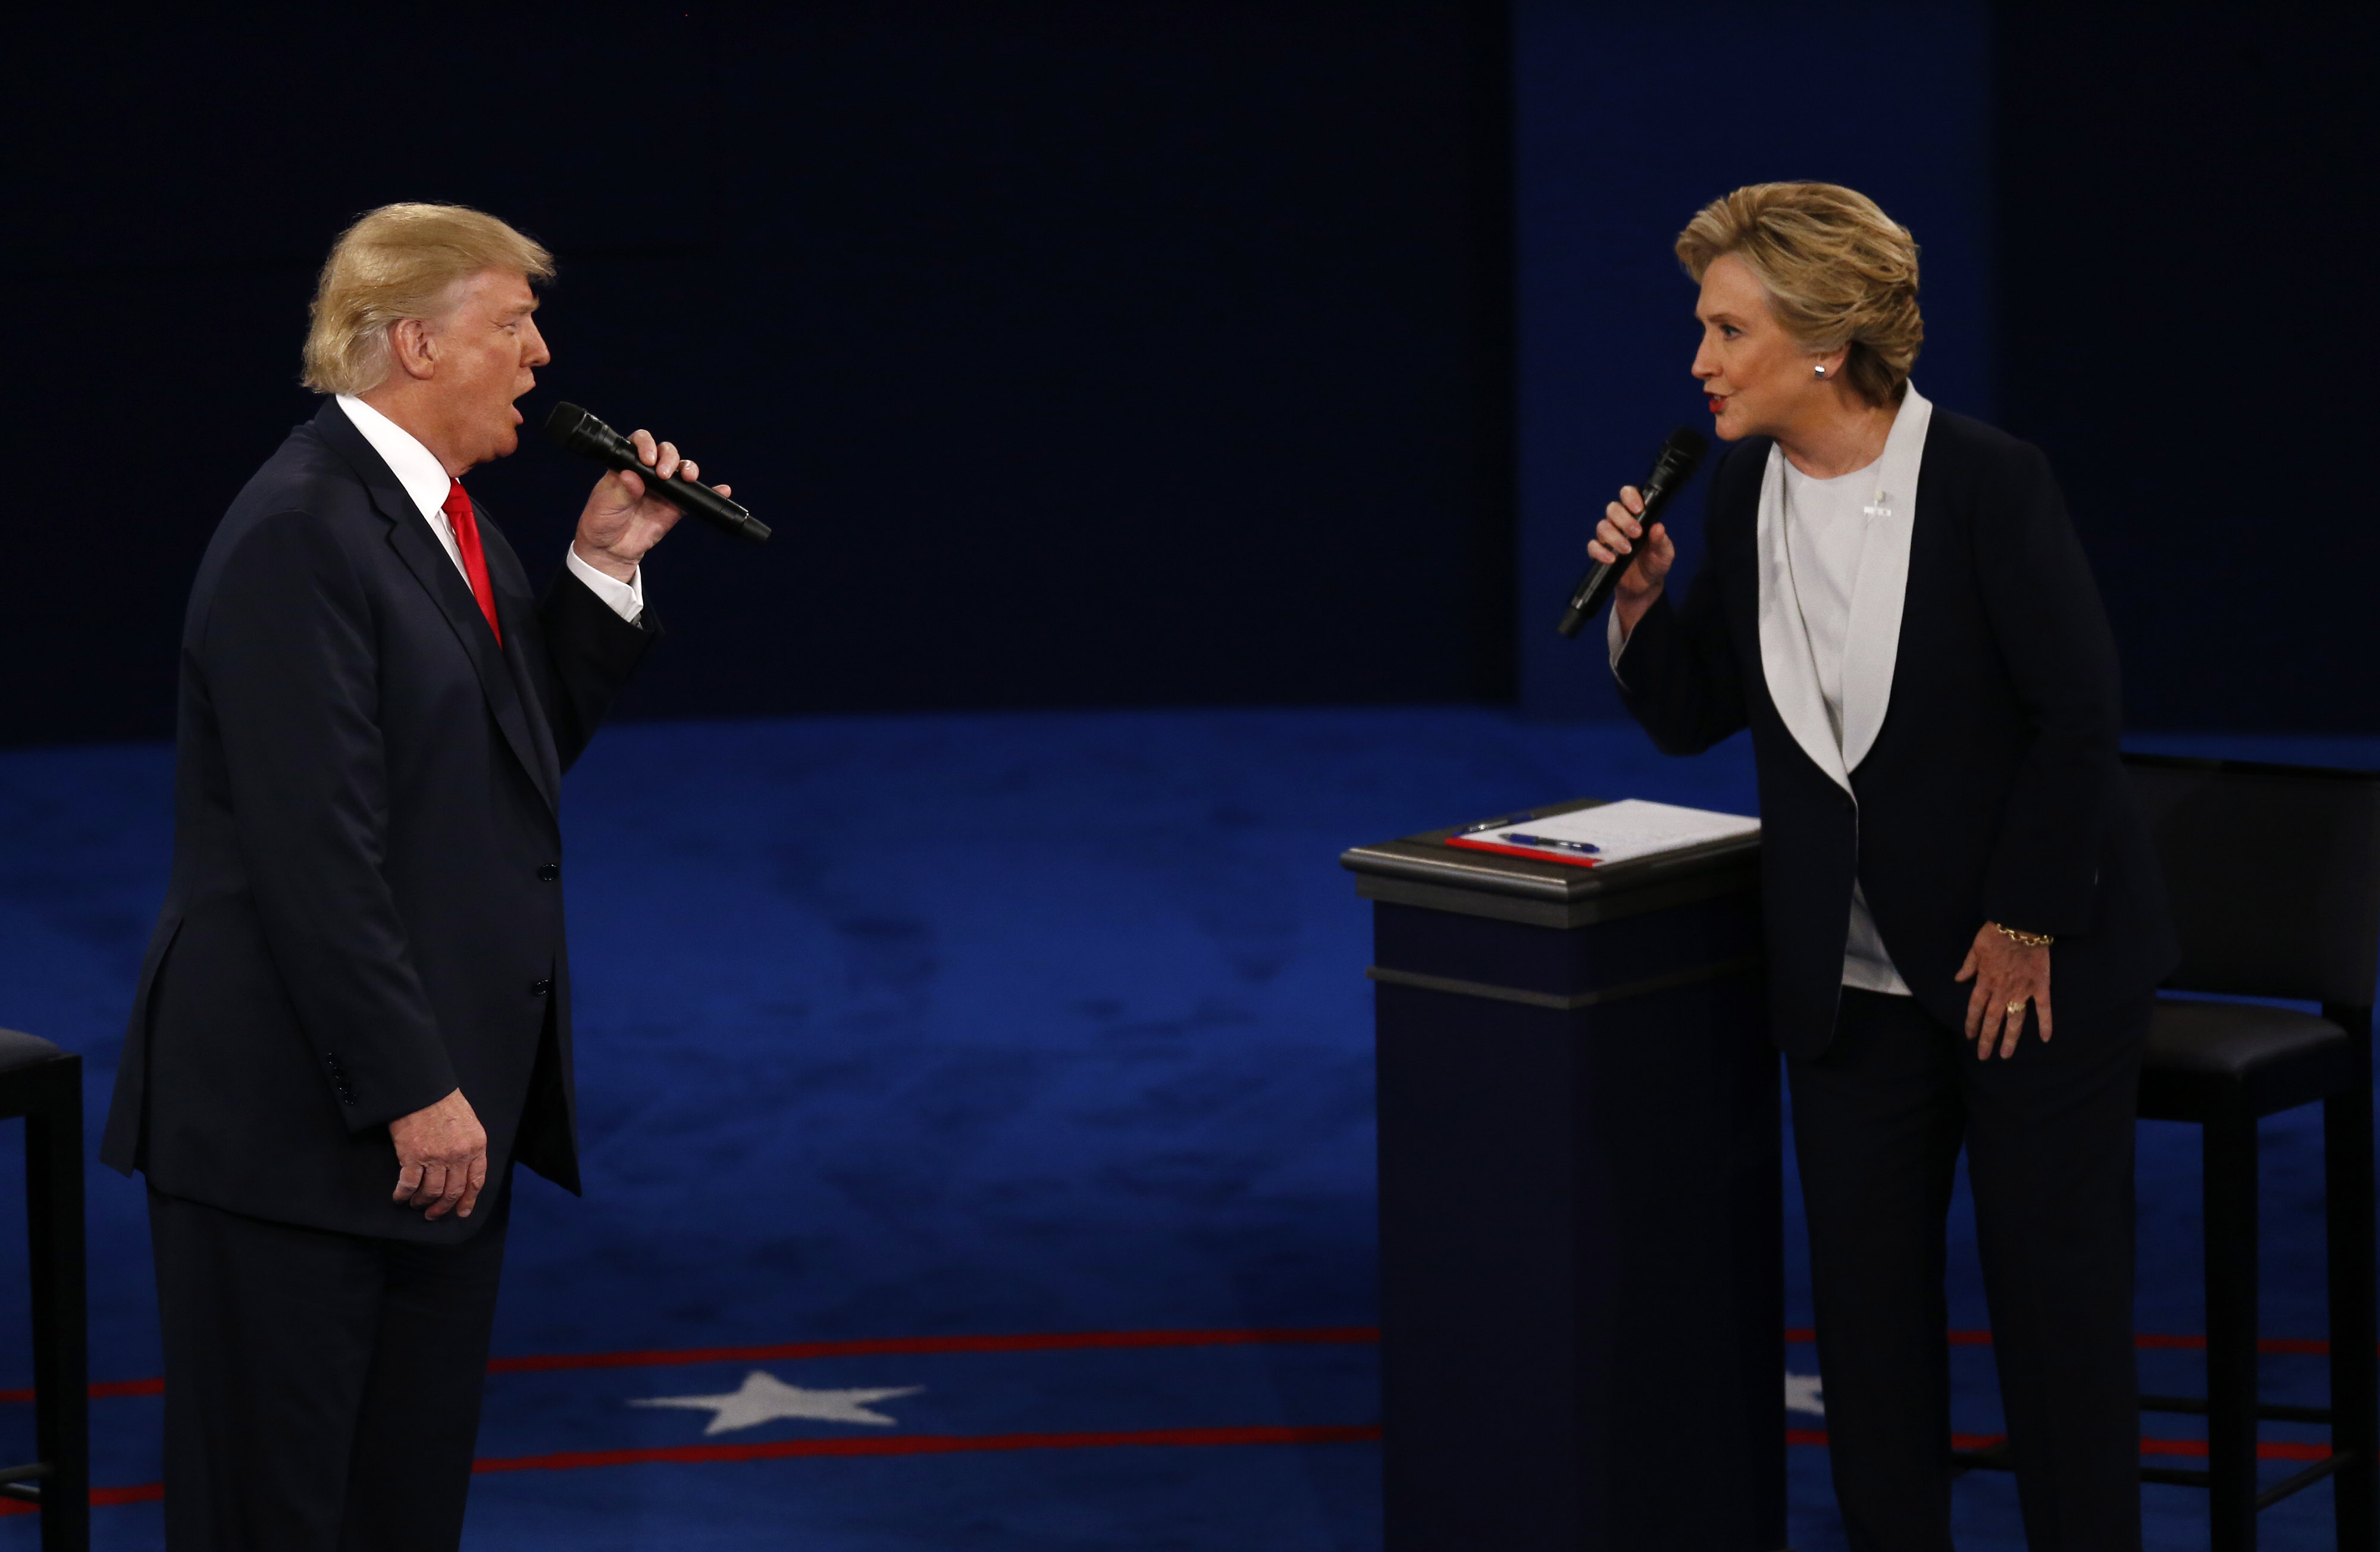 Donald Trump, 2016 Republican presidential nominee, and Hillary Clinton, 2016 Democratic presidential nominee, speak during the second U.S. presidential debate at Washington University in St. Louis, on Oct. 9, 2016.